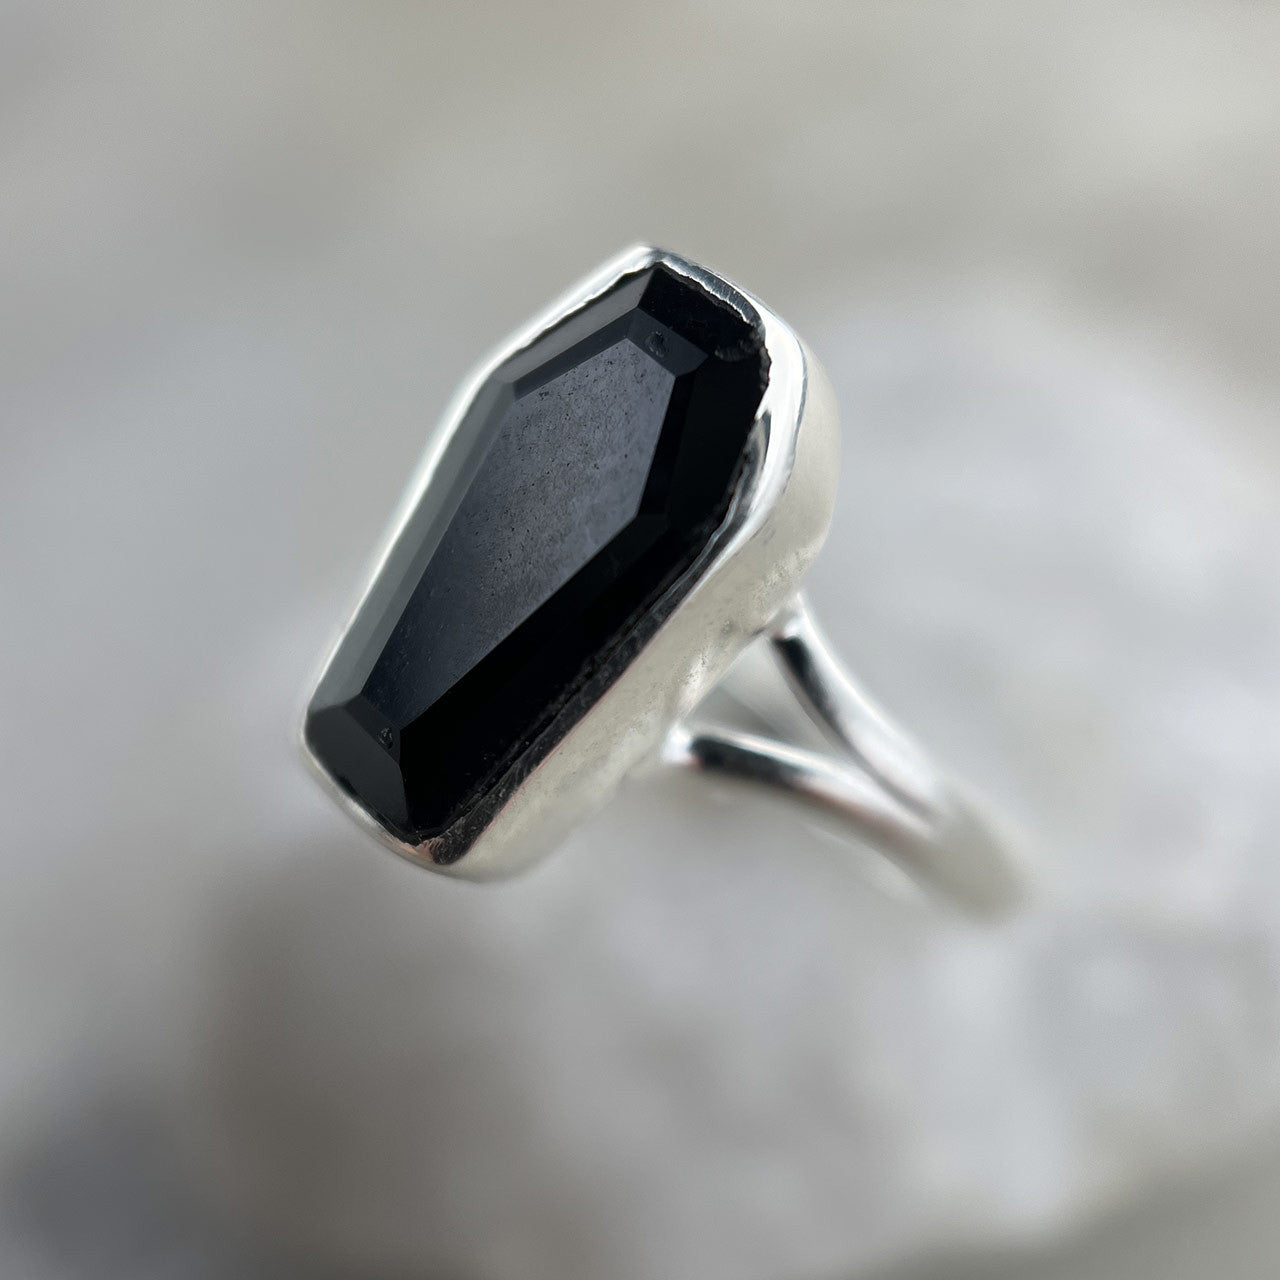 Made of the finest sterling silver and Black Onyx, these coffin rings will bring delight into the lives of any enthusiasts of the spooky, scary, and macabre. The brilliance of the gems ties in perfectly with the fine bone-shaped banding, reminding us of Memento Mori. Life may be fleeting but should be lived with vibrancy and passion. Wear this ring and remember to live as brightly as the jewel’s shine.